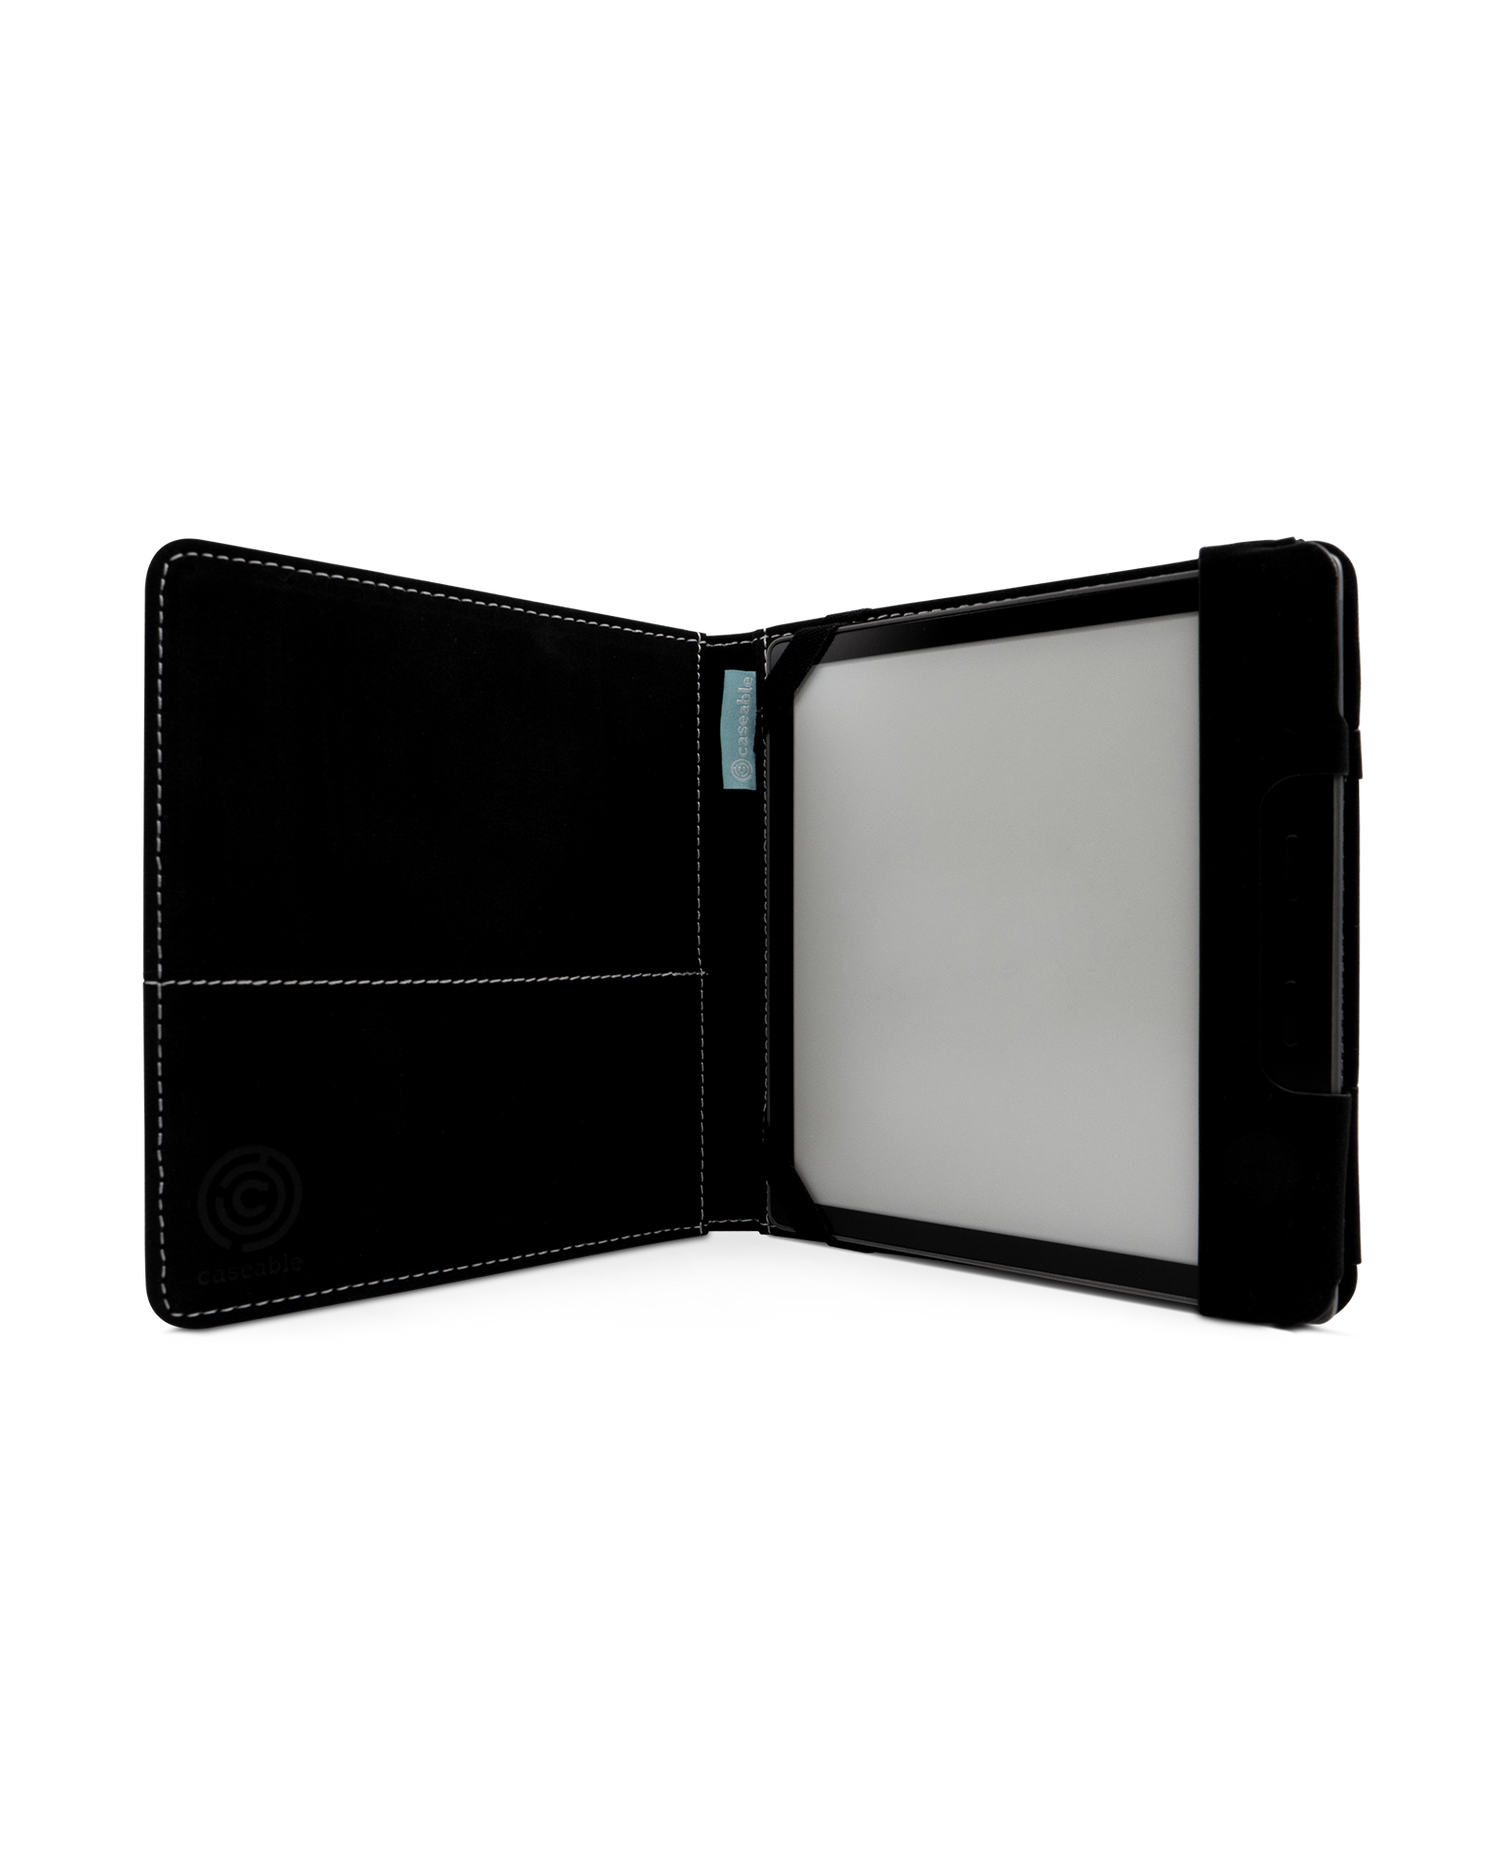 Bamboo Pattern eReader Case for tolino vision 6: Opened interior view